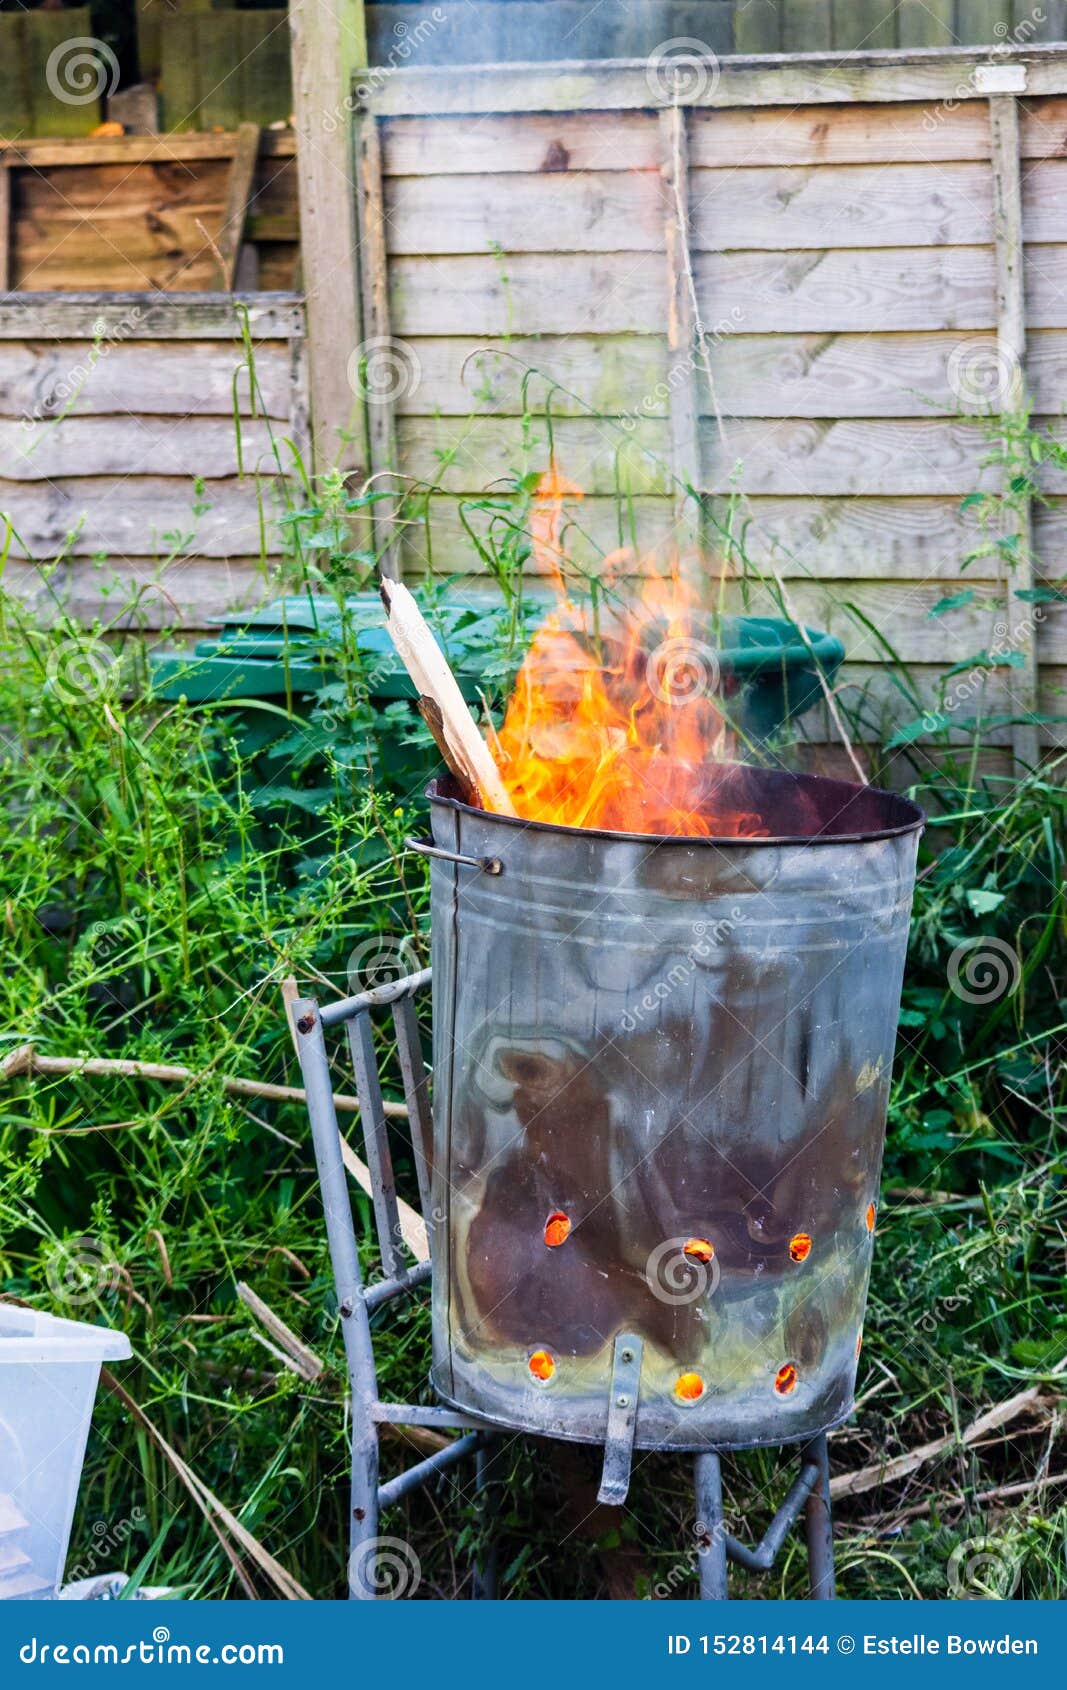 A Garden Incinerator Bin Rested on a Metal Chair Frame Burning